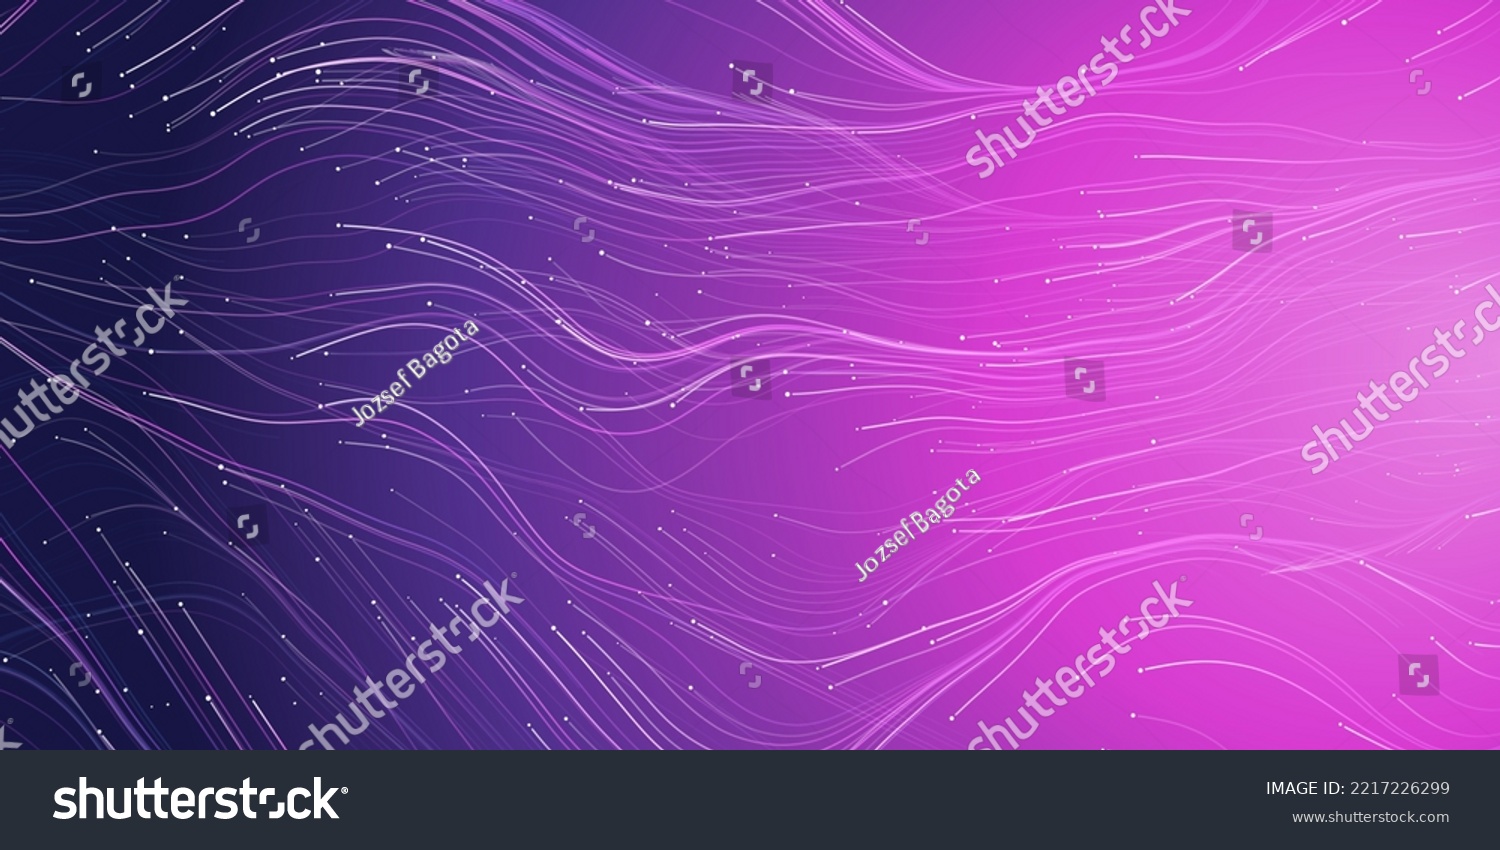 SVG of Flying, Flowing Energy Lines Pattern in Glowing Purple Deep Space, Starry Sky Around - Modern Style Futuristic Technology or Astronomy Concept Background,Generative Art,Creative Template,Vector Design svg